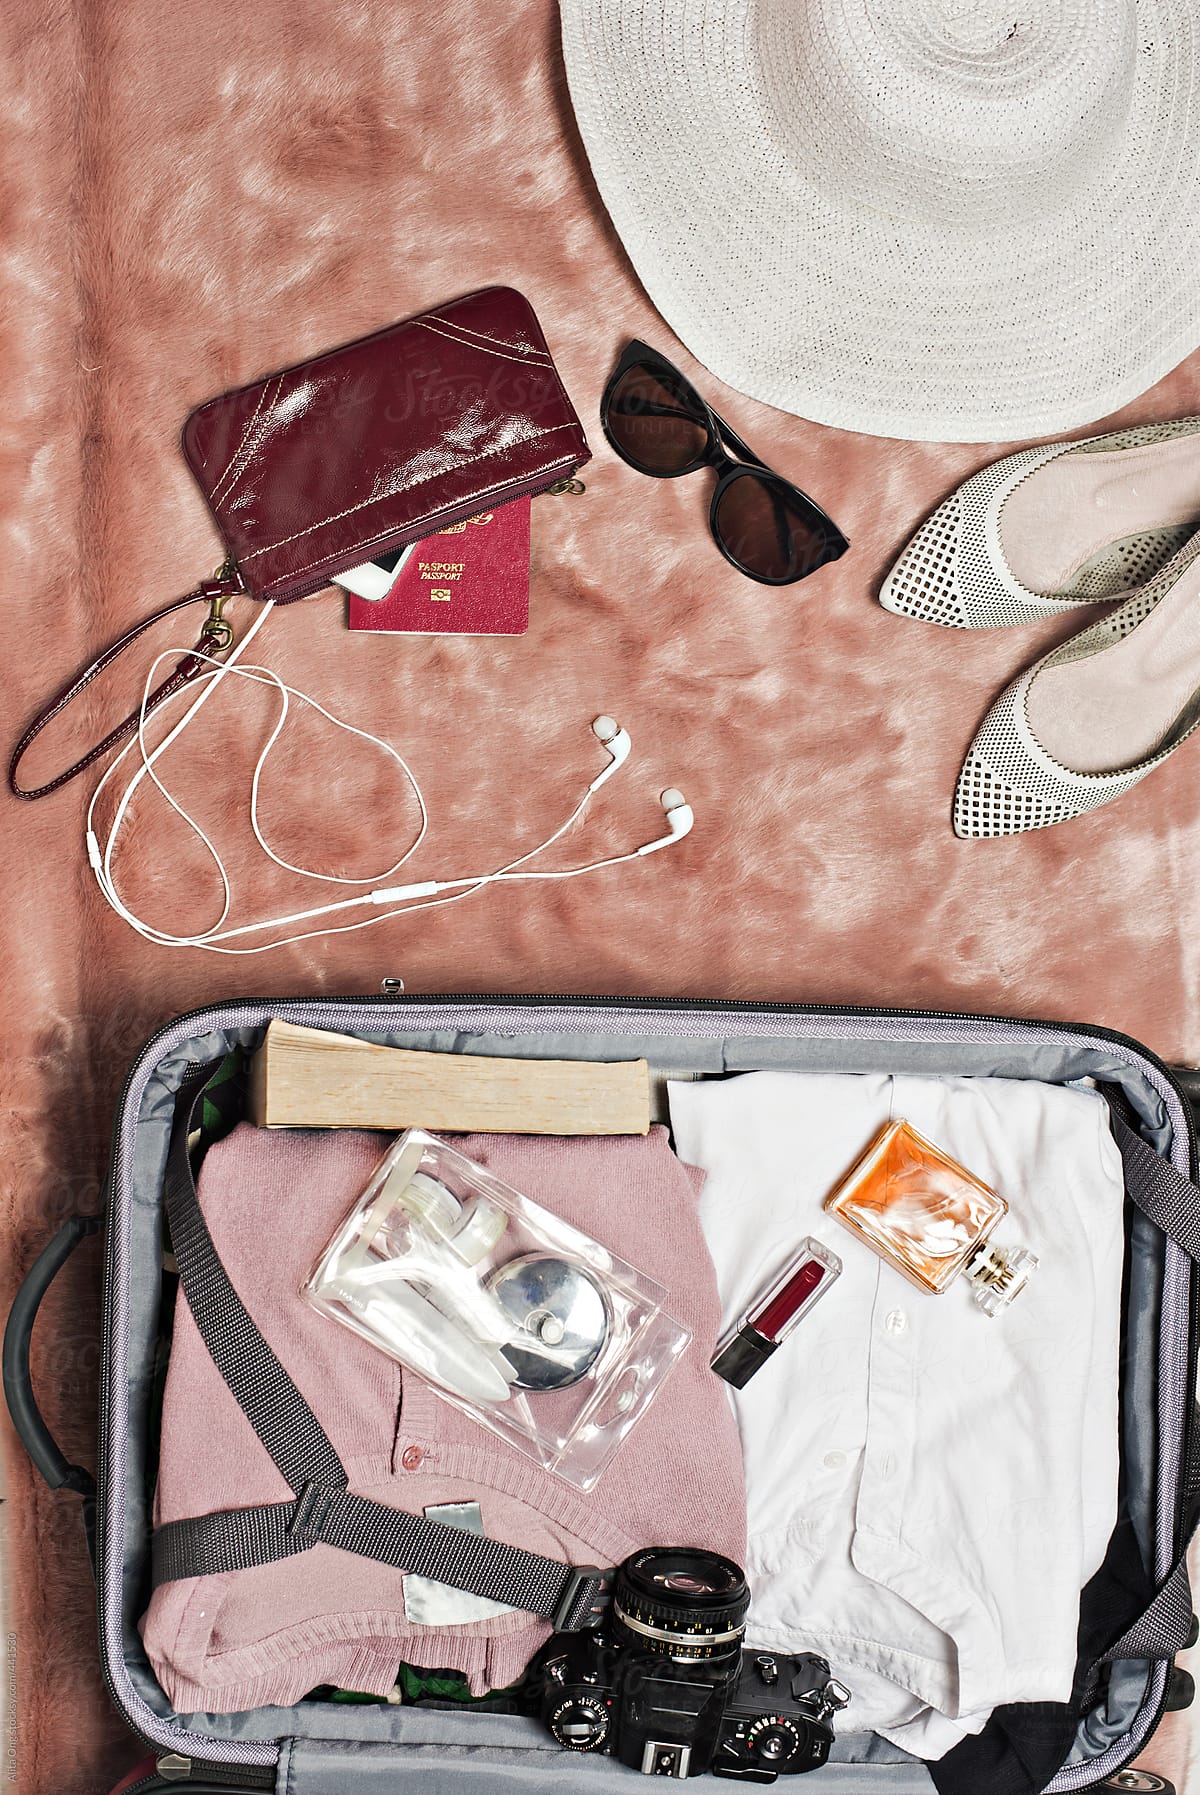 Woman Packing A Suitcase For A Trip by Stocksy Contributor Alita